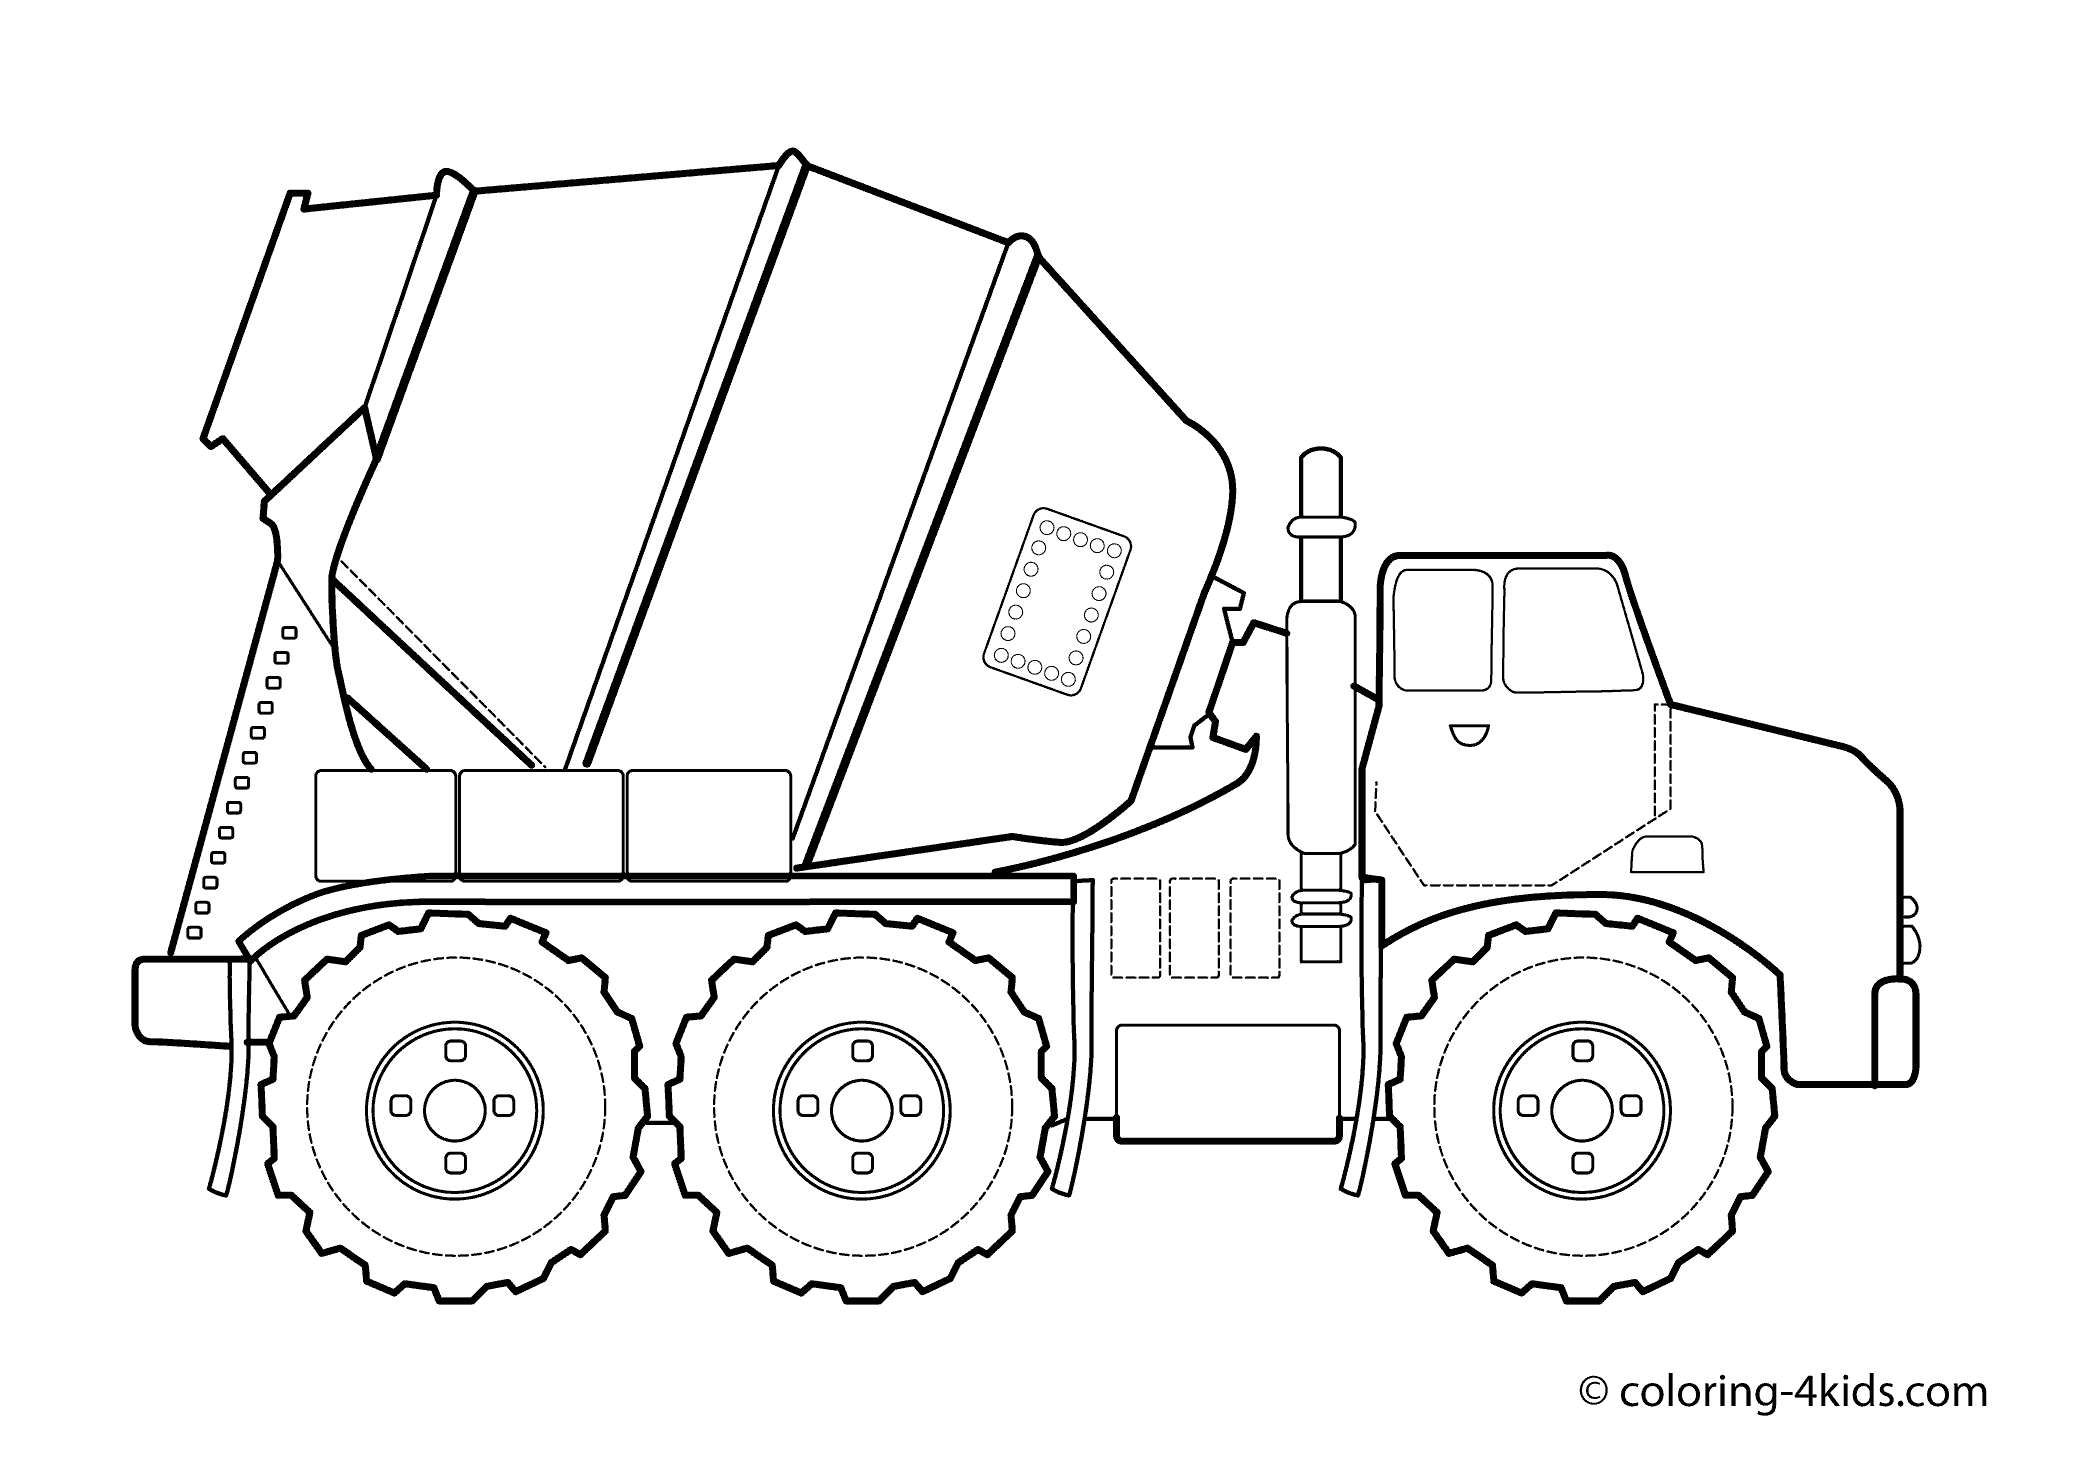 Cement Mixer Coloring Pages To Print | Coloring Pages For All Ages